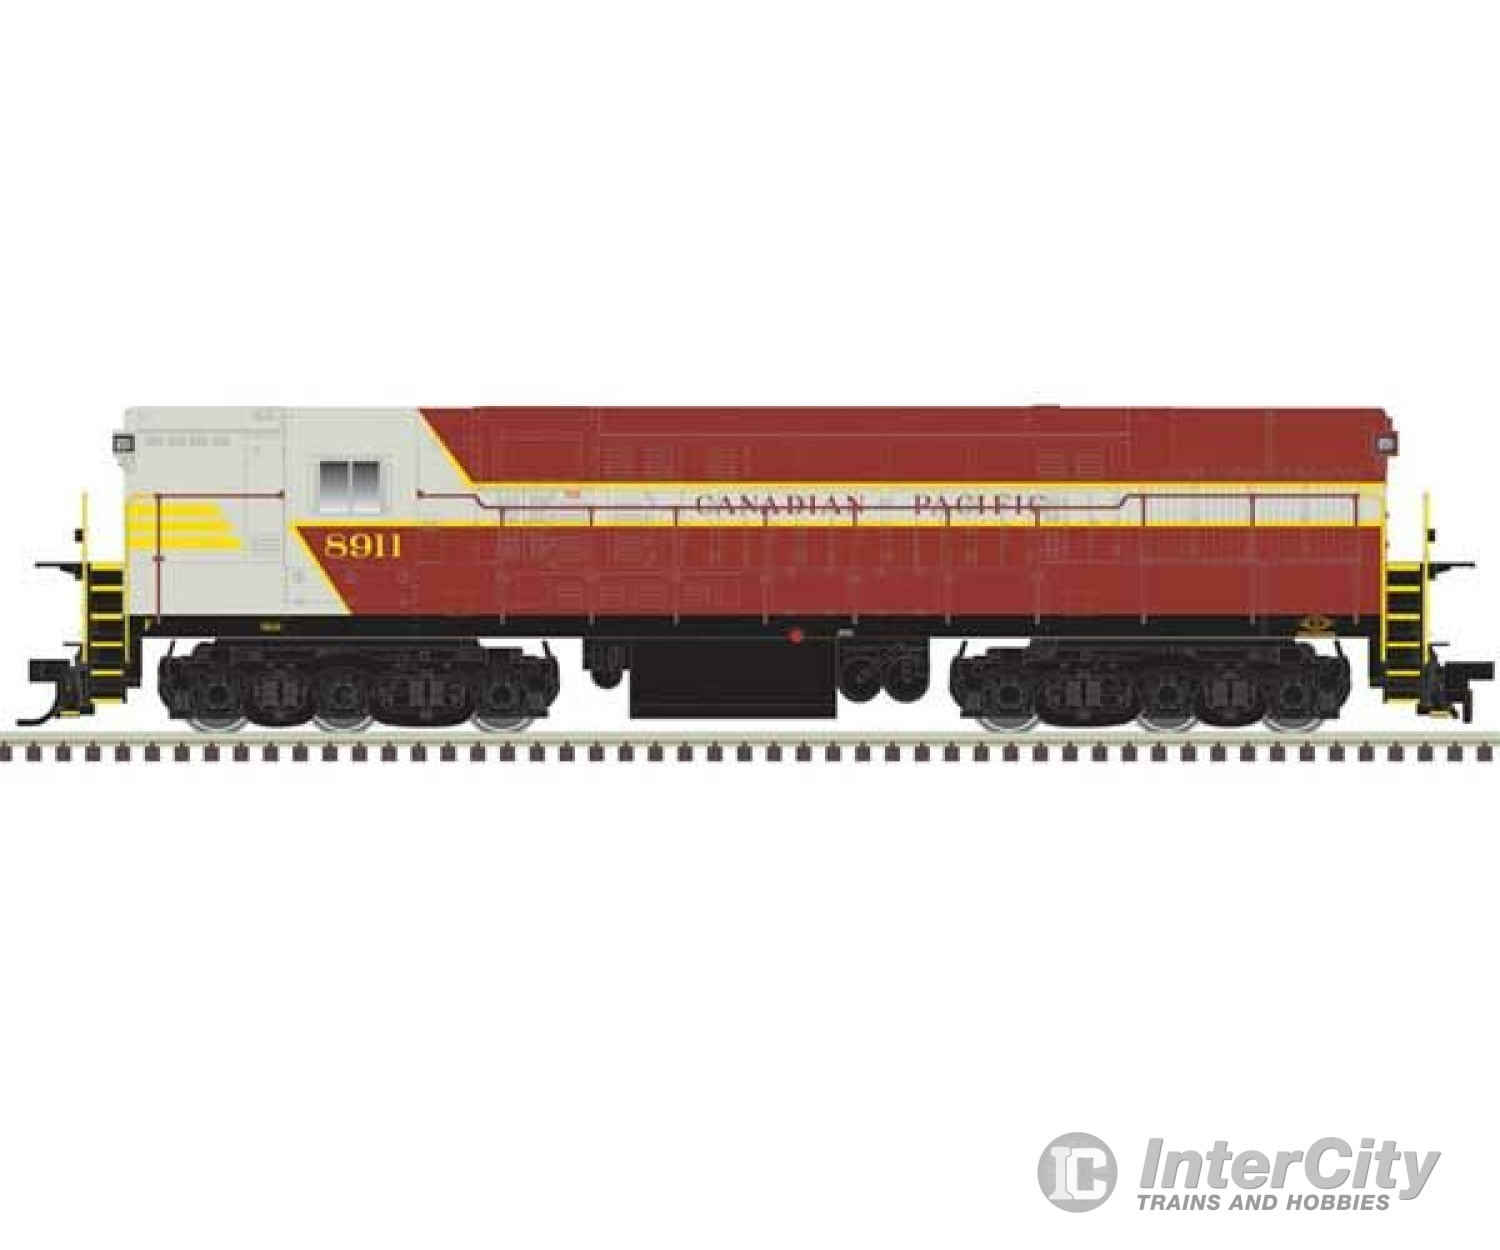 Atlas N 40005416 Fm H-24-66 Phase 2 Trainmaster - Loksound & Dcc -- Canadian Pacific #8911 (Late